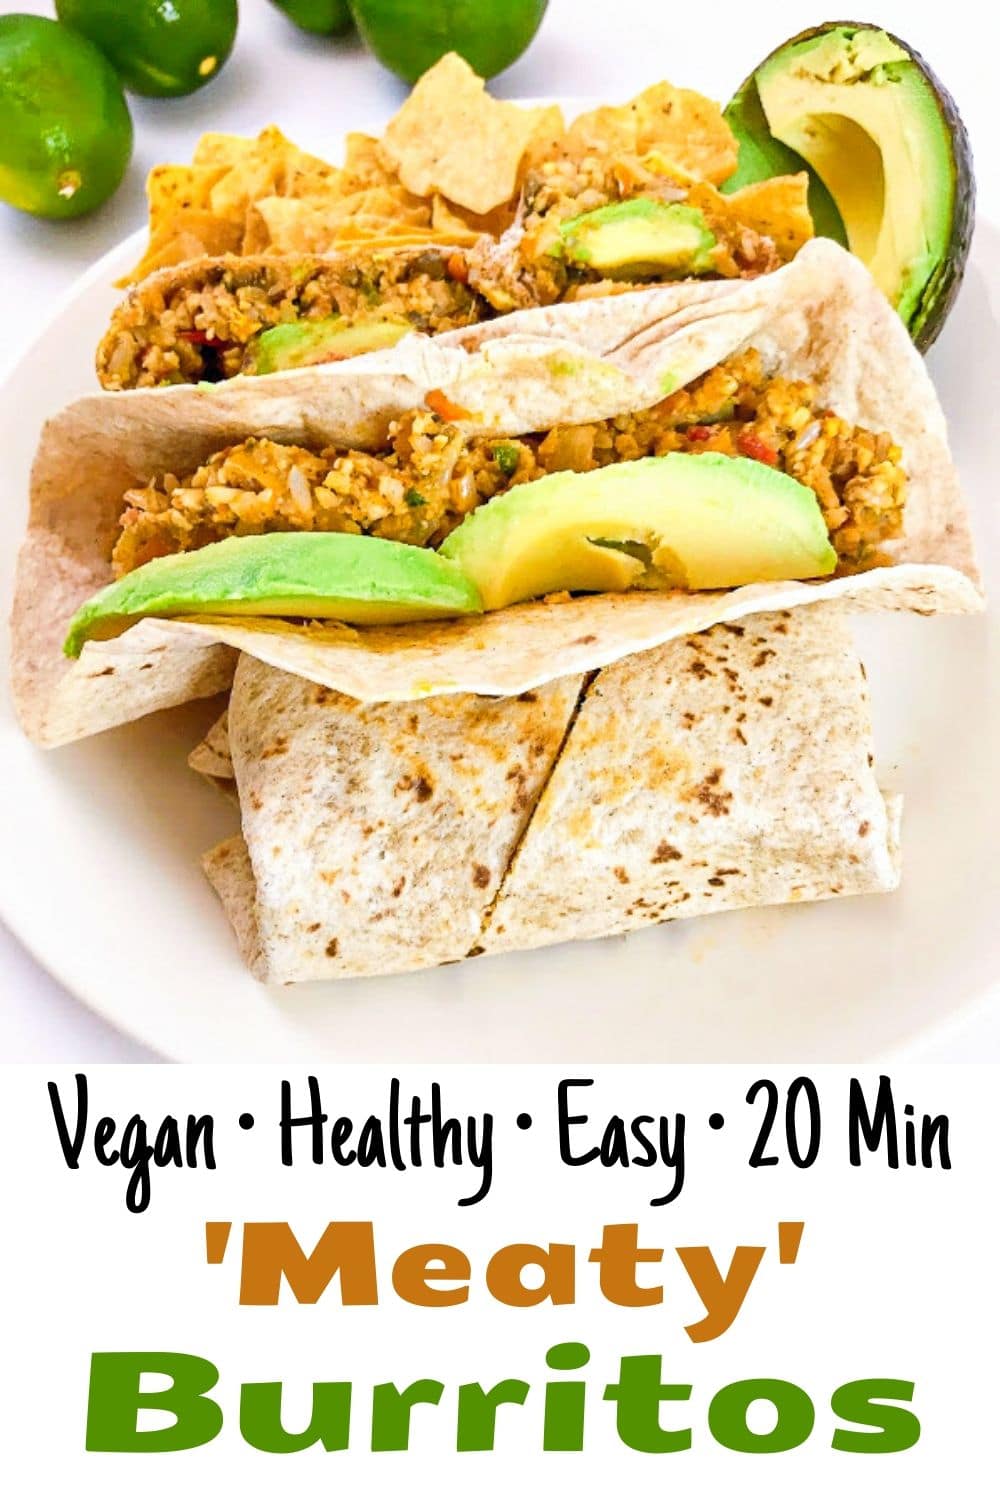 quick and easy vegan healthy meaty burritos for pinterest